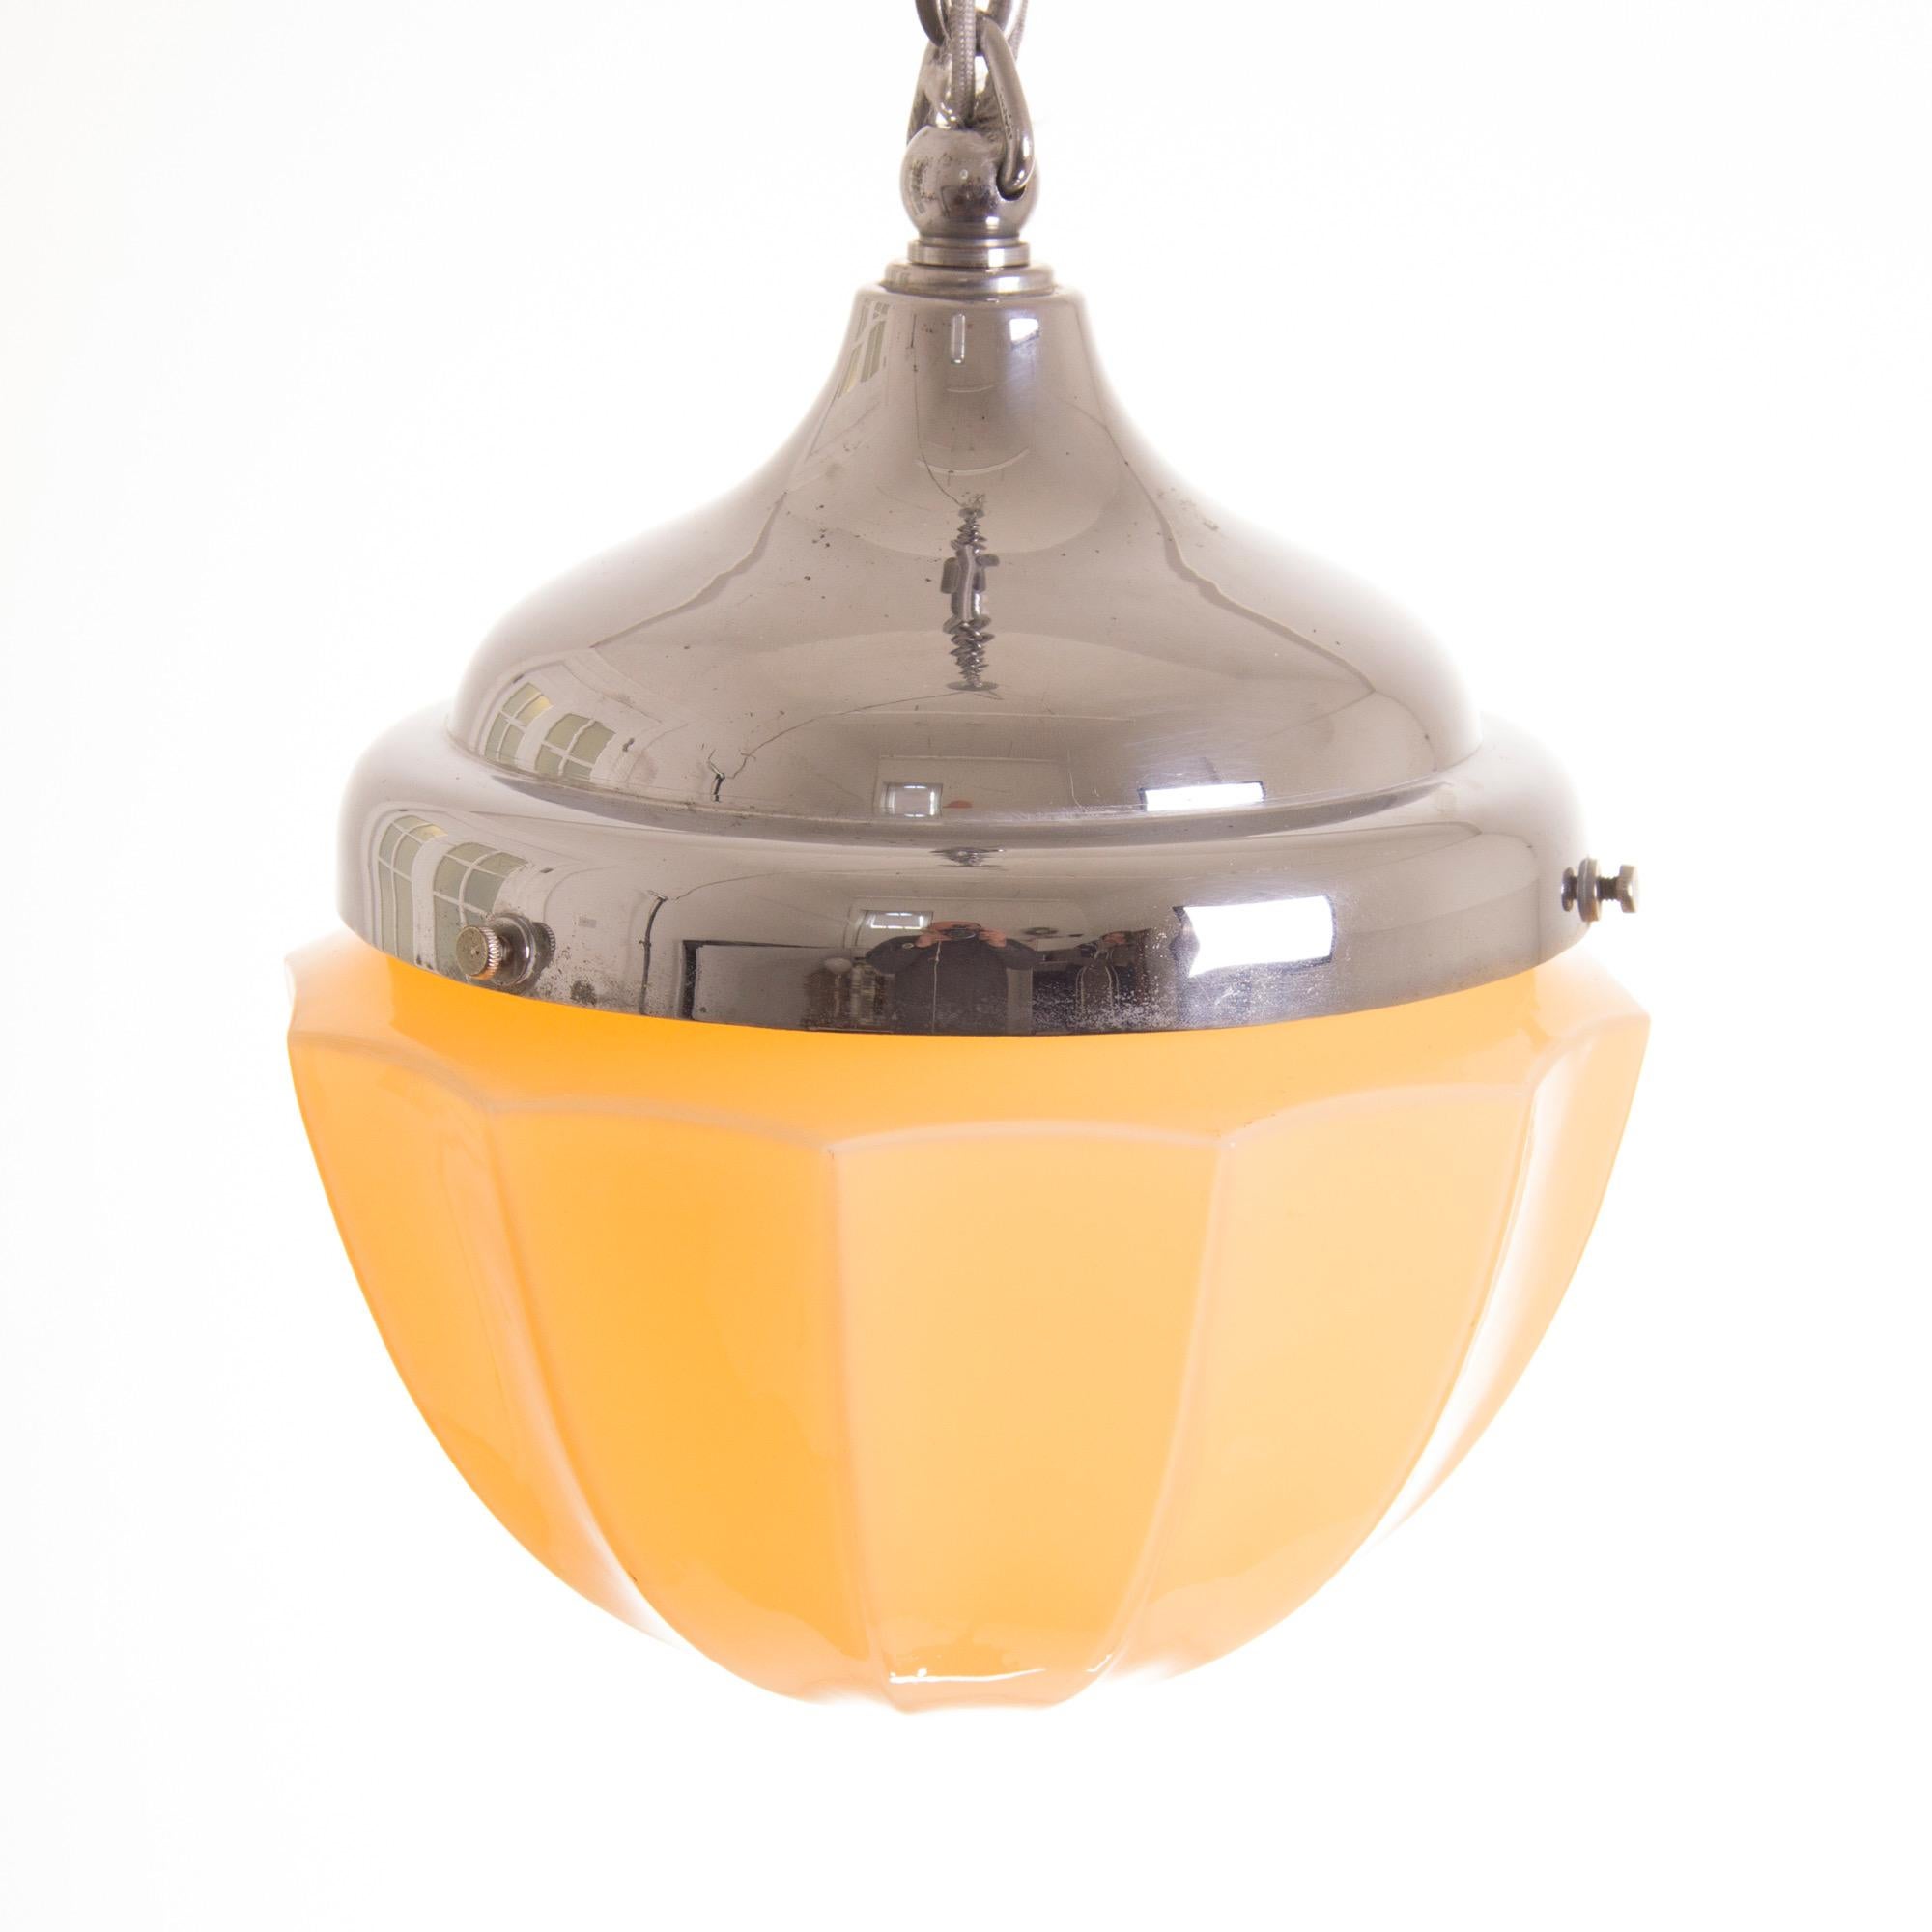 Art deco ceiling pendant
Art deco pleated yellow glass pendant light with its original chrome gallery and link chain.
Dimensions: H: 80cm W: 21cm D: 21cm
British, circa 1930.